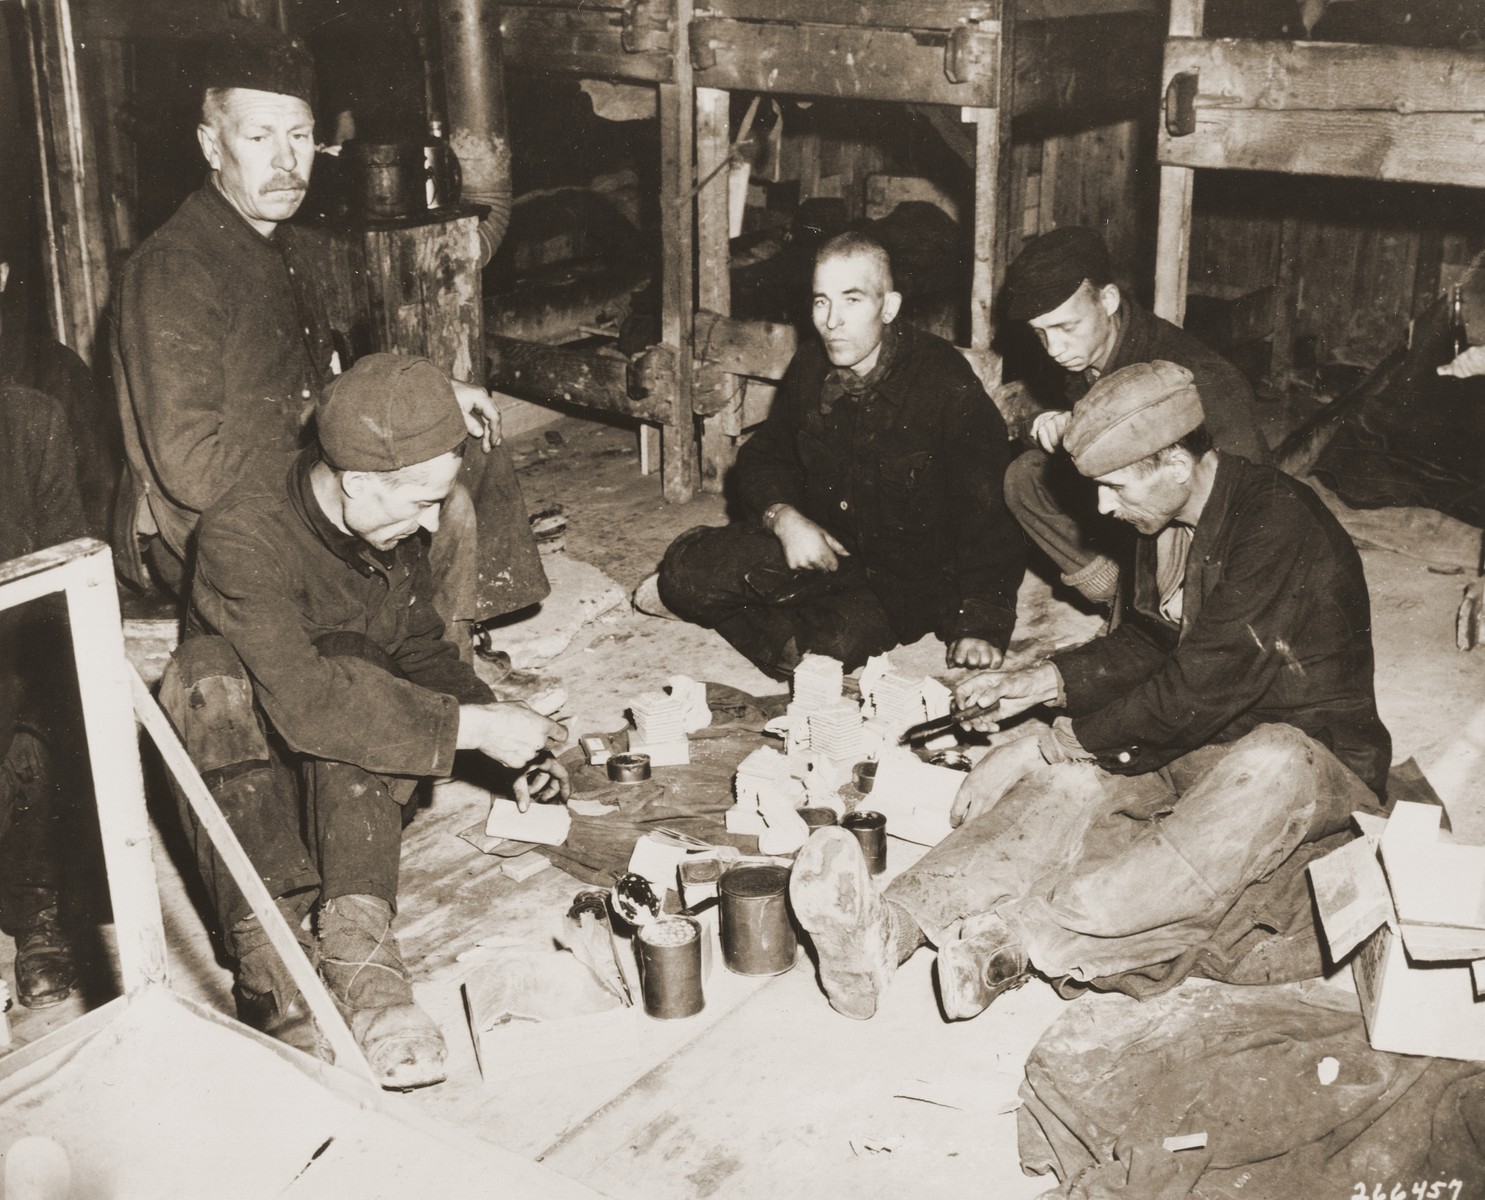 A group of Soviet POWs share rations in the newly liberated Hemer POW camp.

Original caption: "These gaunt-faced Soviets share a 10-in-1 ration supply kit furnished by men of a unit of the 75th Infantry Division, U.S. Ninth Army.  Soviet doctors at the camp say many of the inmates will die from malnutrition, tuberculosis, dysentery, and typhus.  Approximately 22,000 men were in the camp when it was liberated by the U.S. Army."